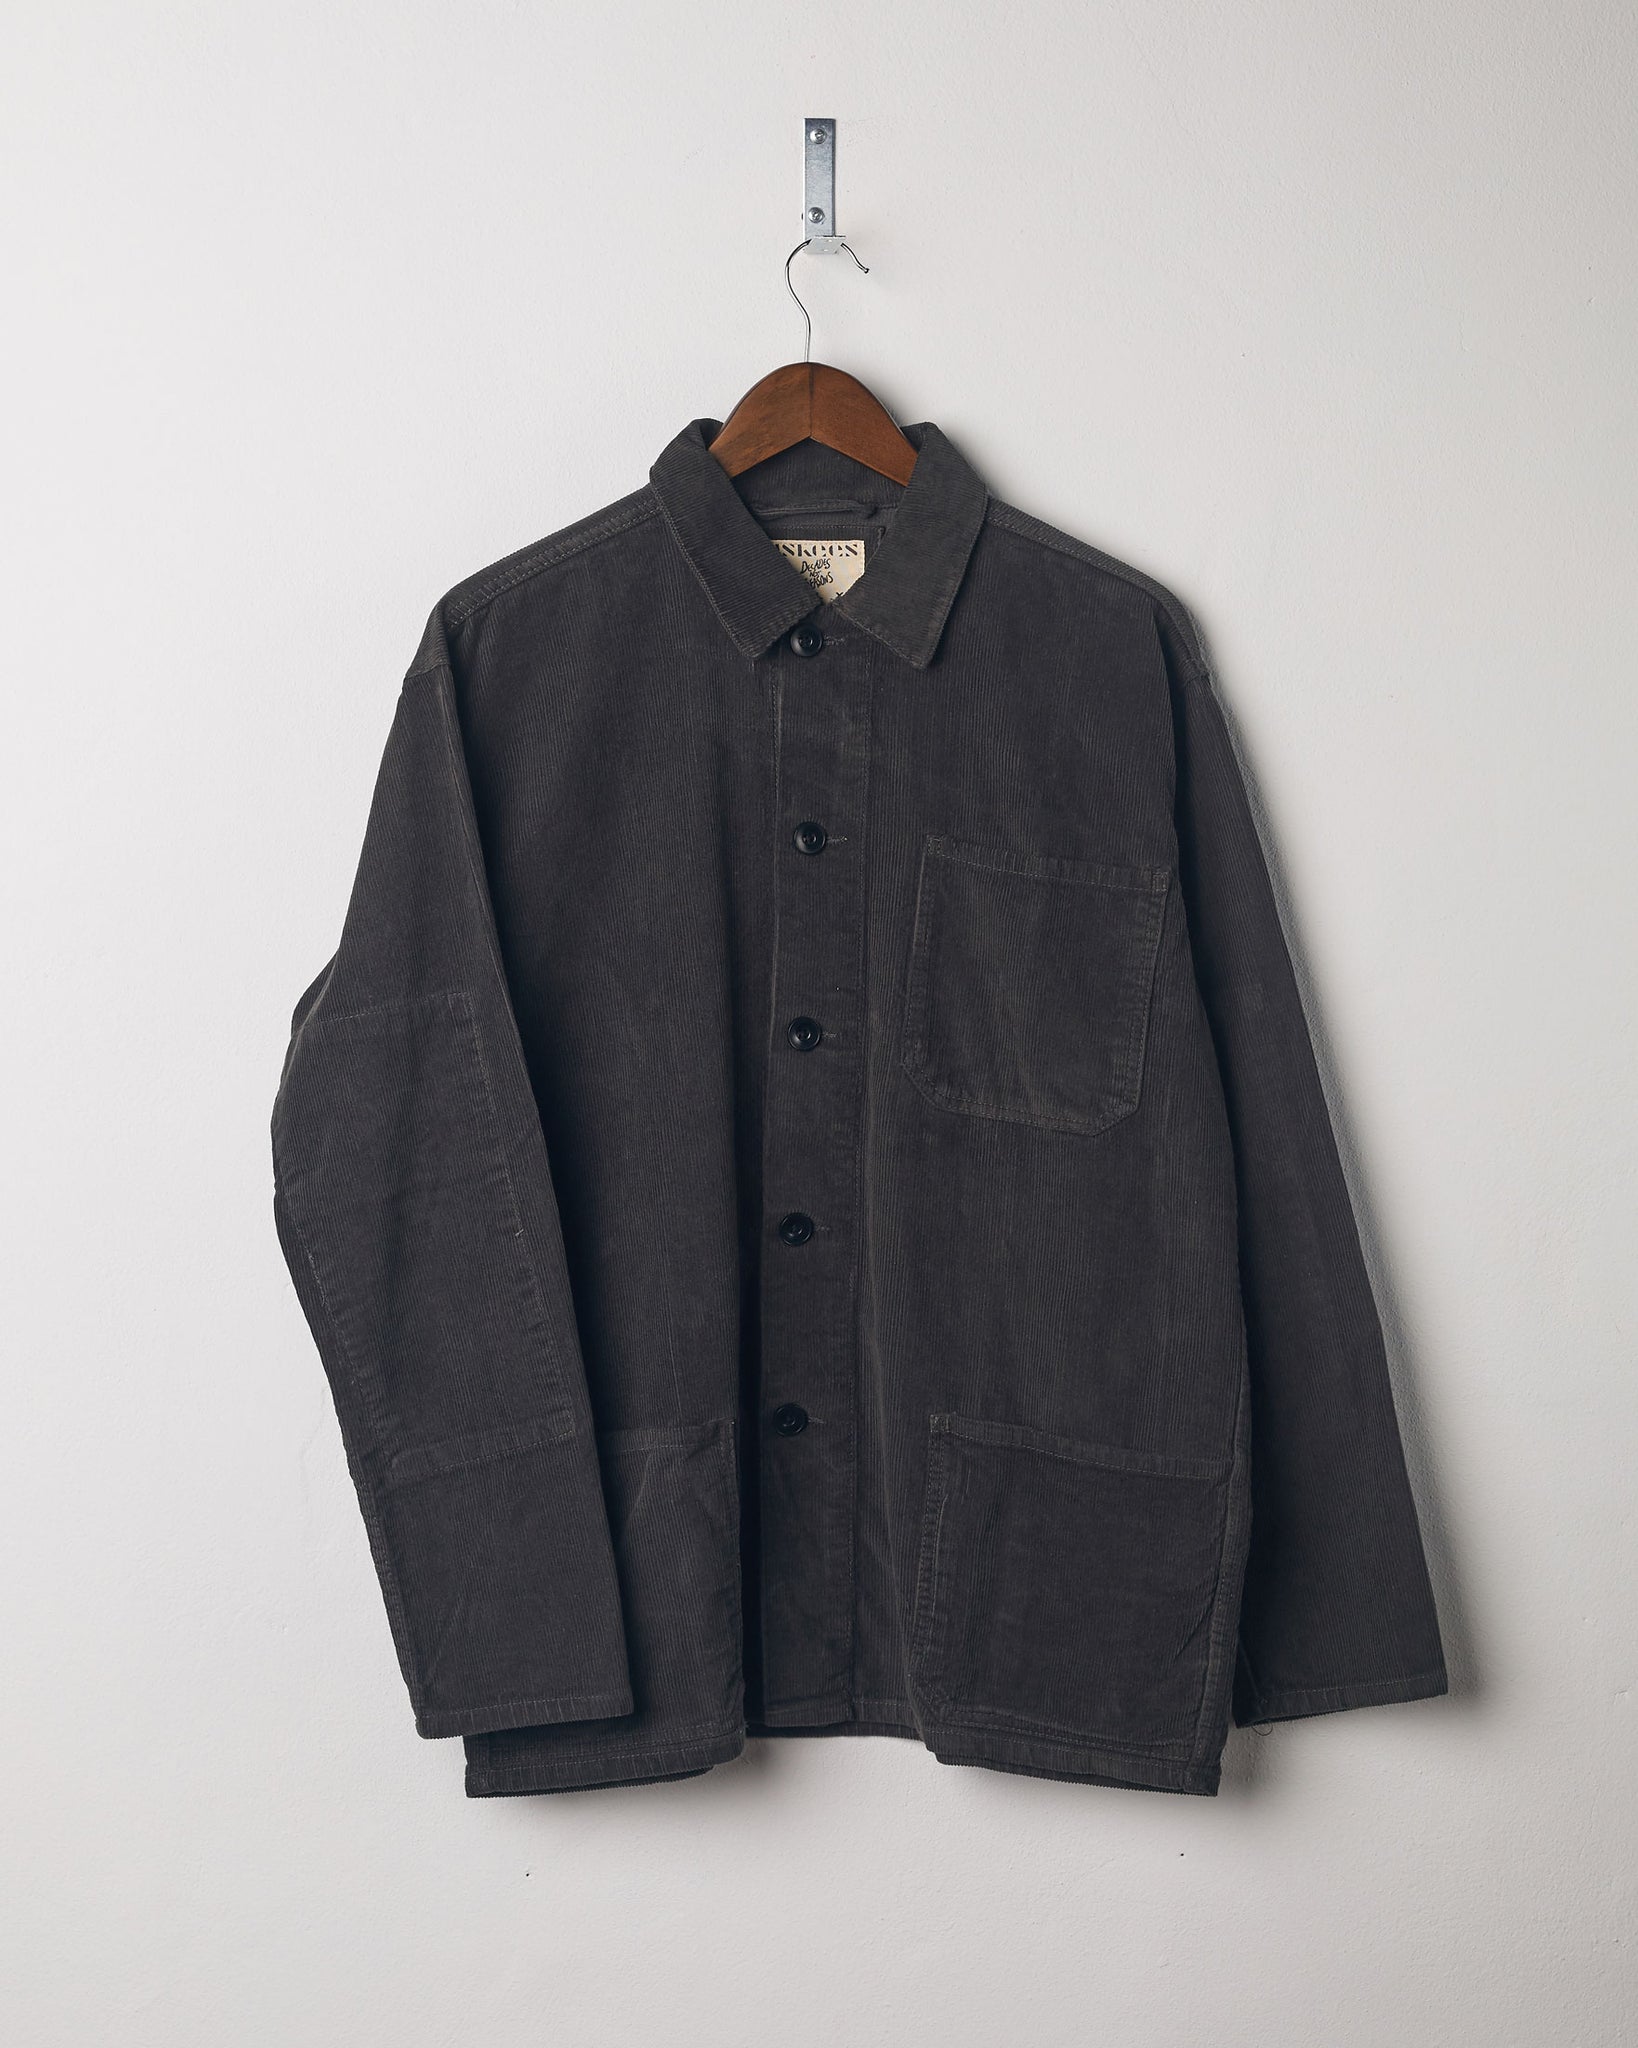 Faded black coloured, buttoned corduroy overshirt from Uskees presented on hanger. Clear view of breast and hip pocket and corozo buttons.